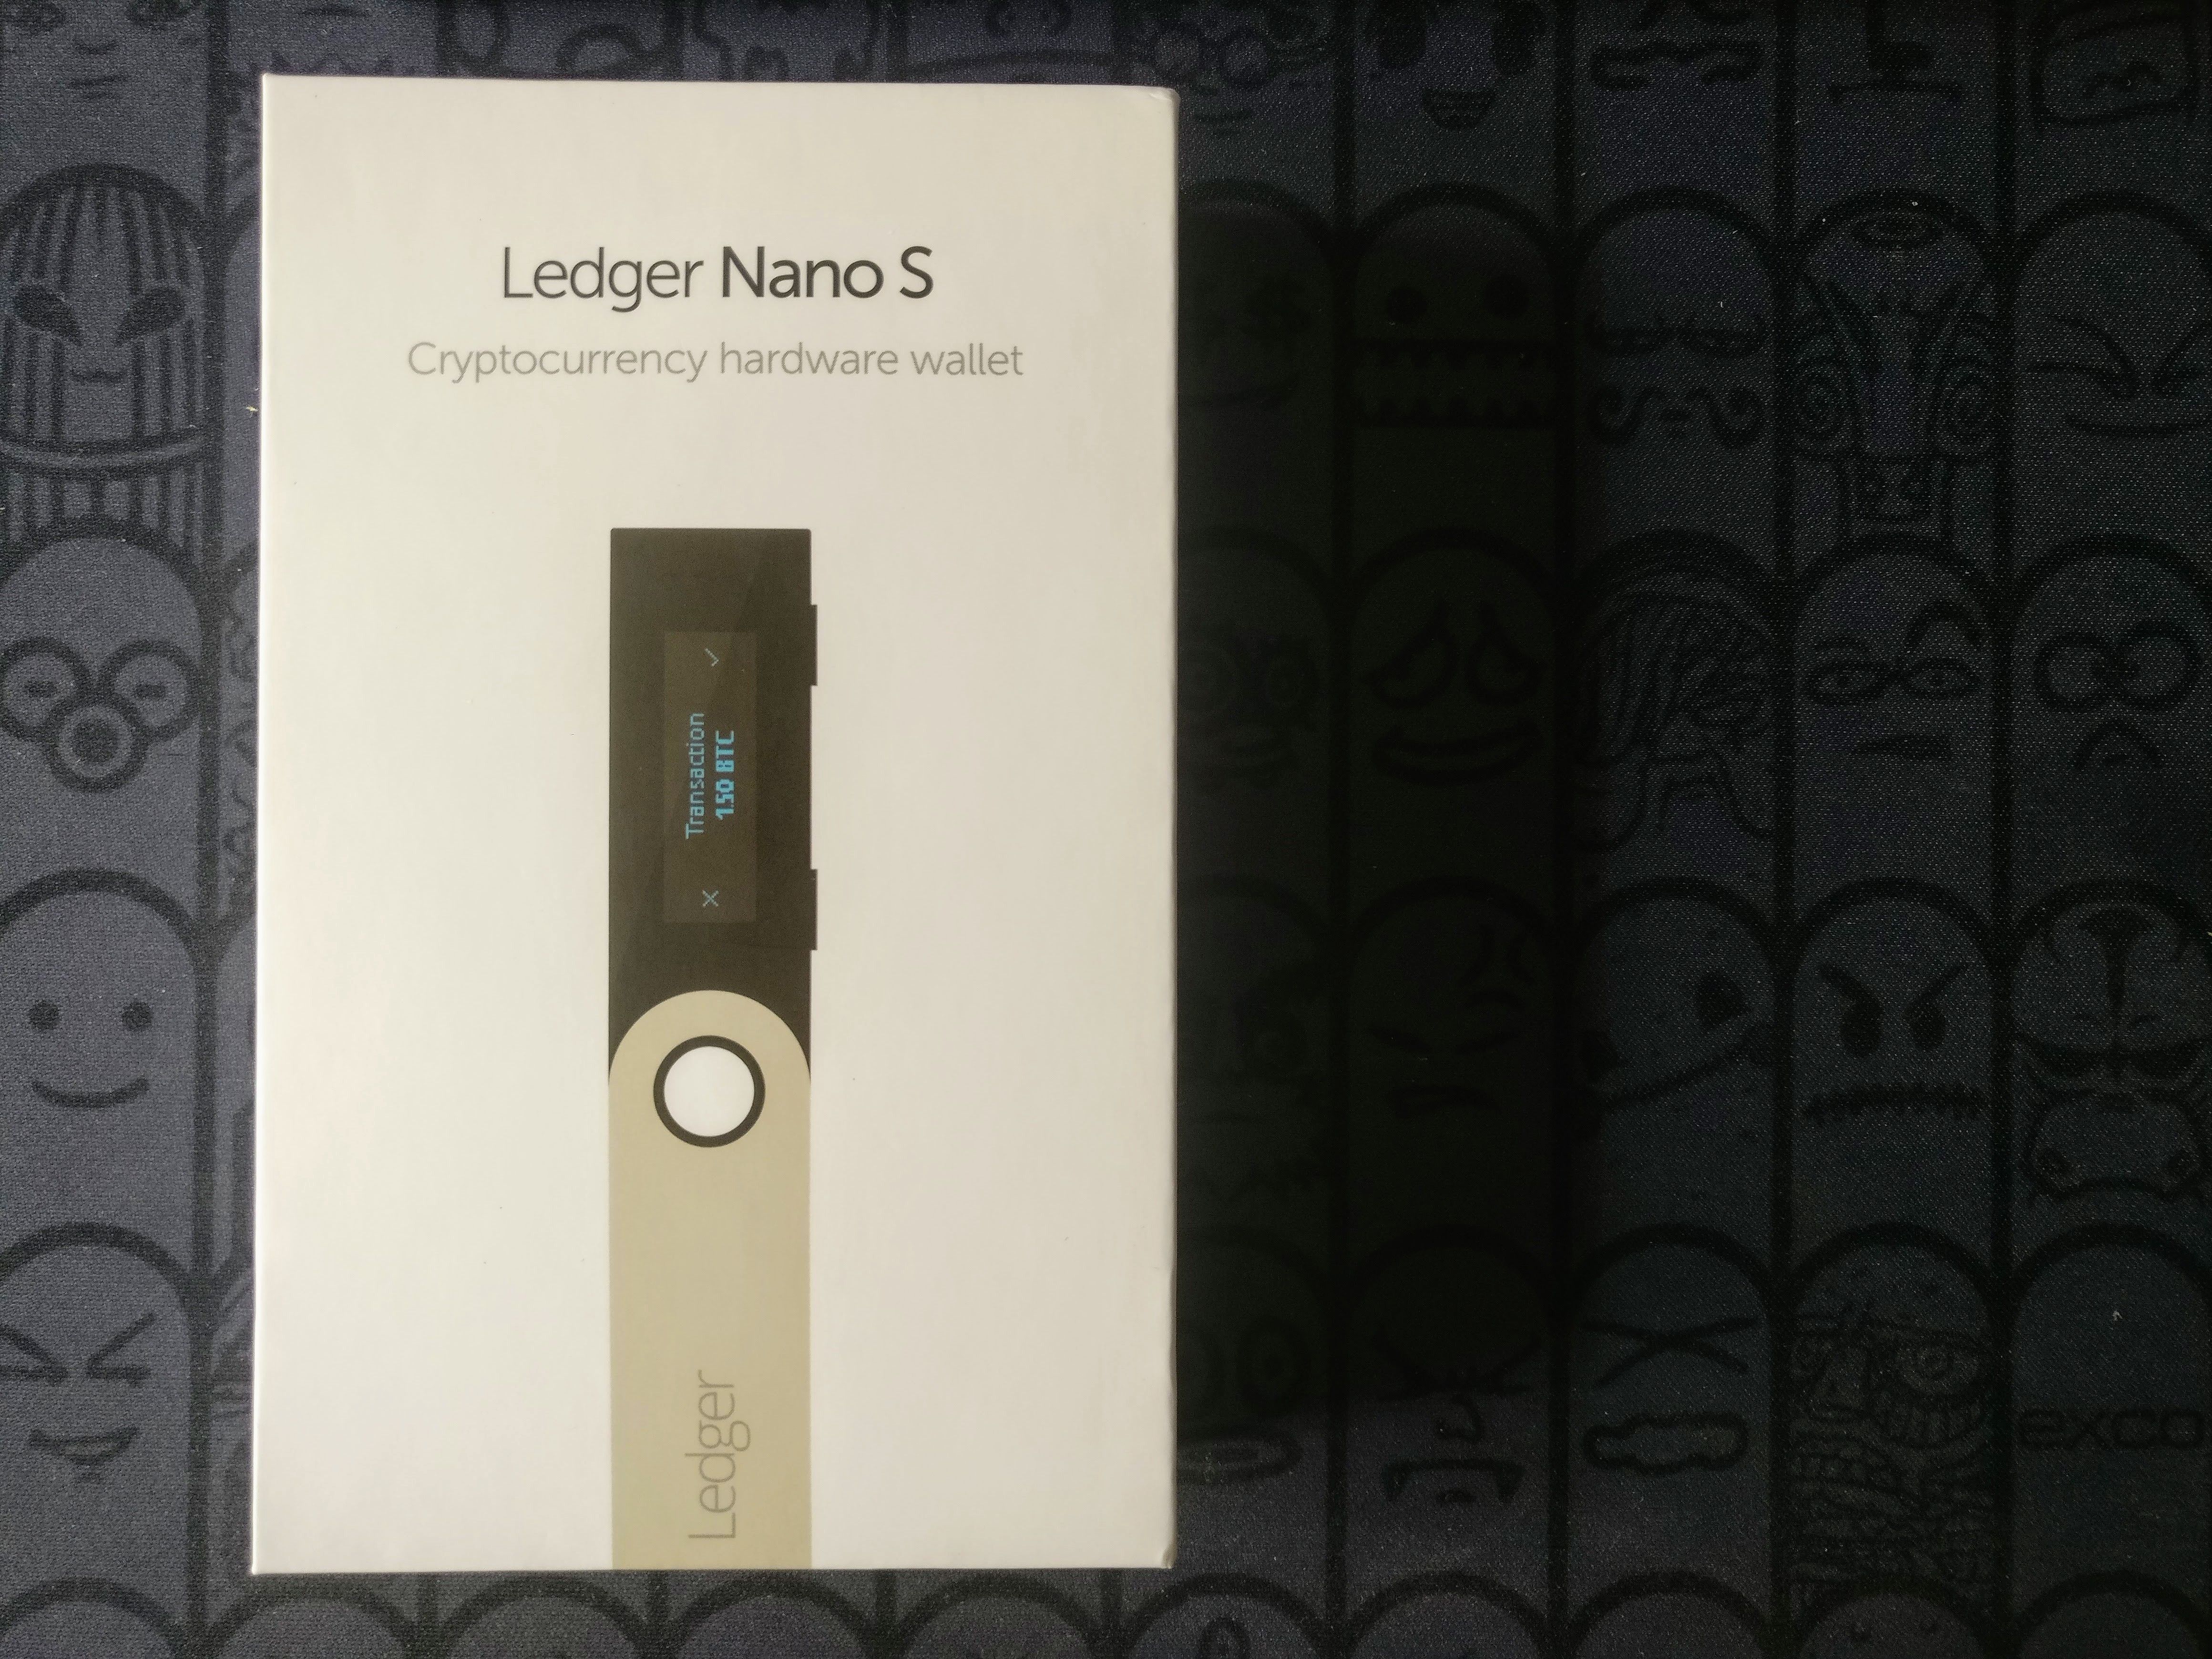 TechReview#1 - Unboxing of Ledger Nano S